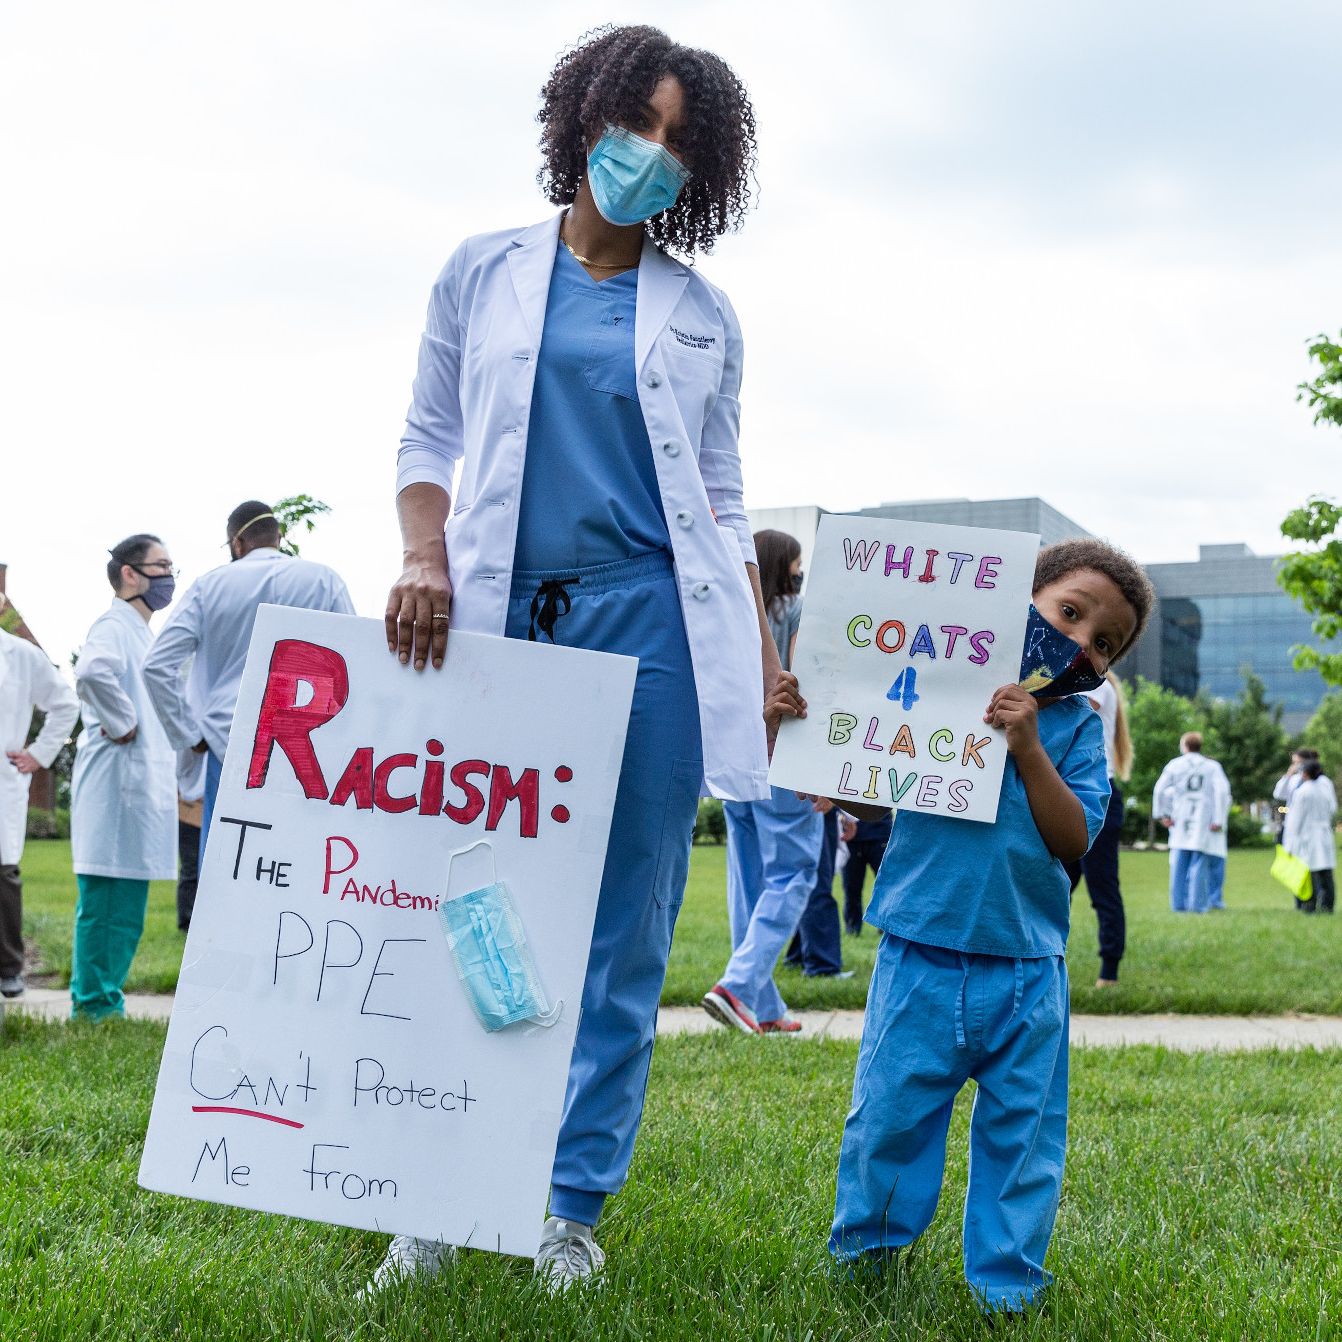 A woman and child wearing scrubs and face masks are holding signs